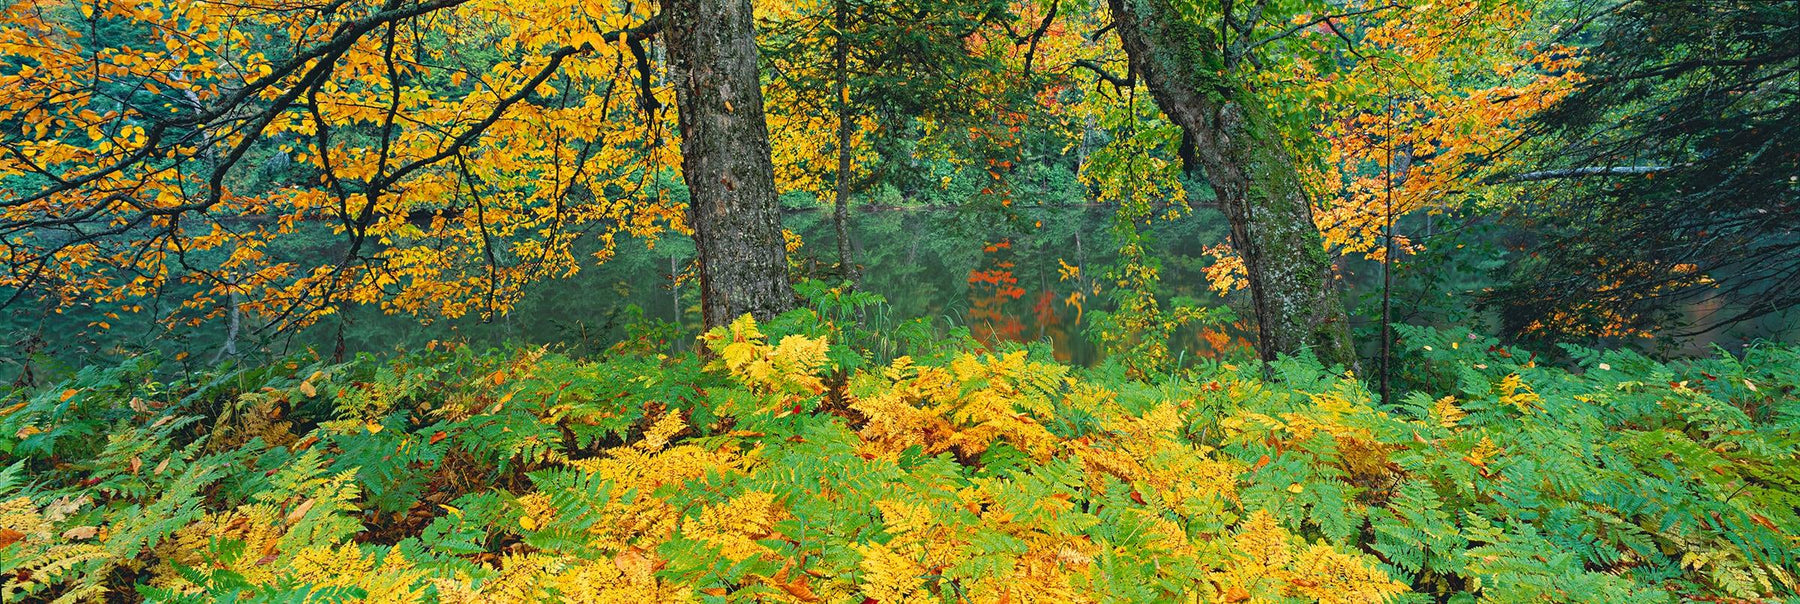 Yellow and green ferns below two trees in front of the Androscoggin River New Hampshire